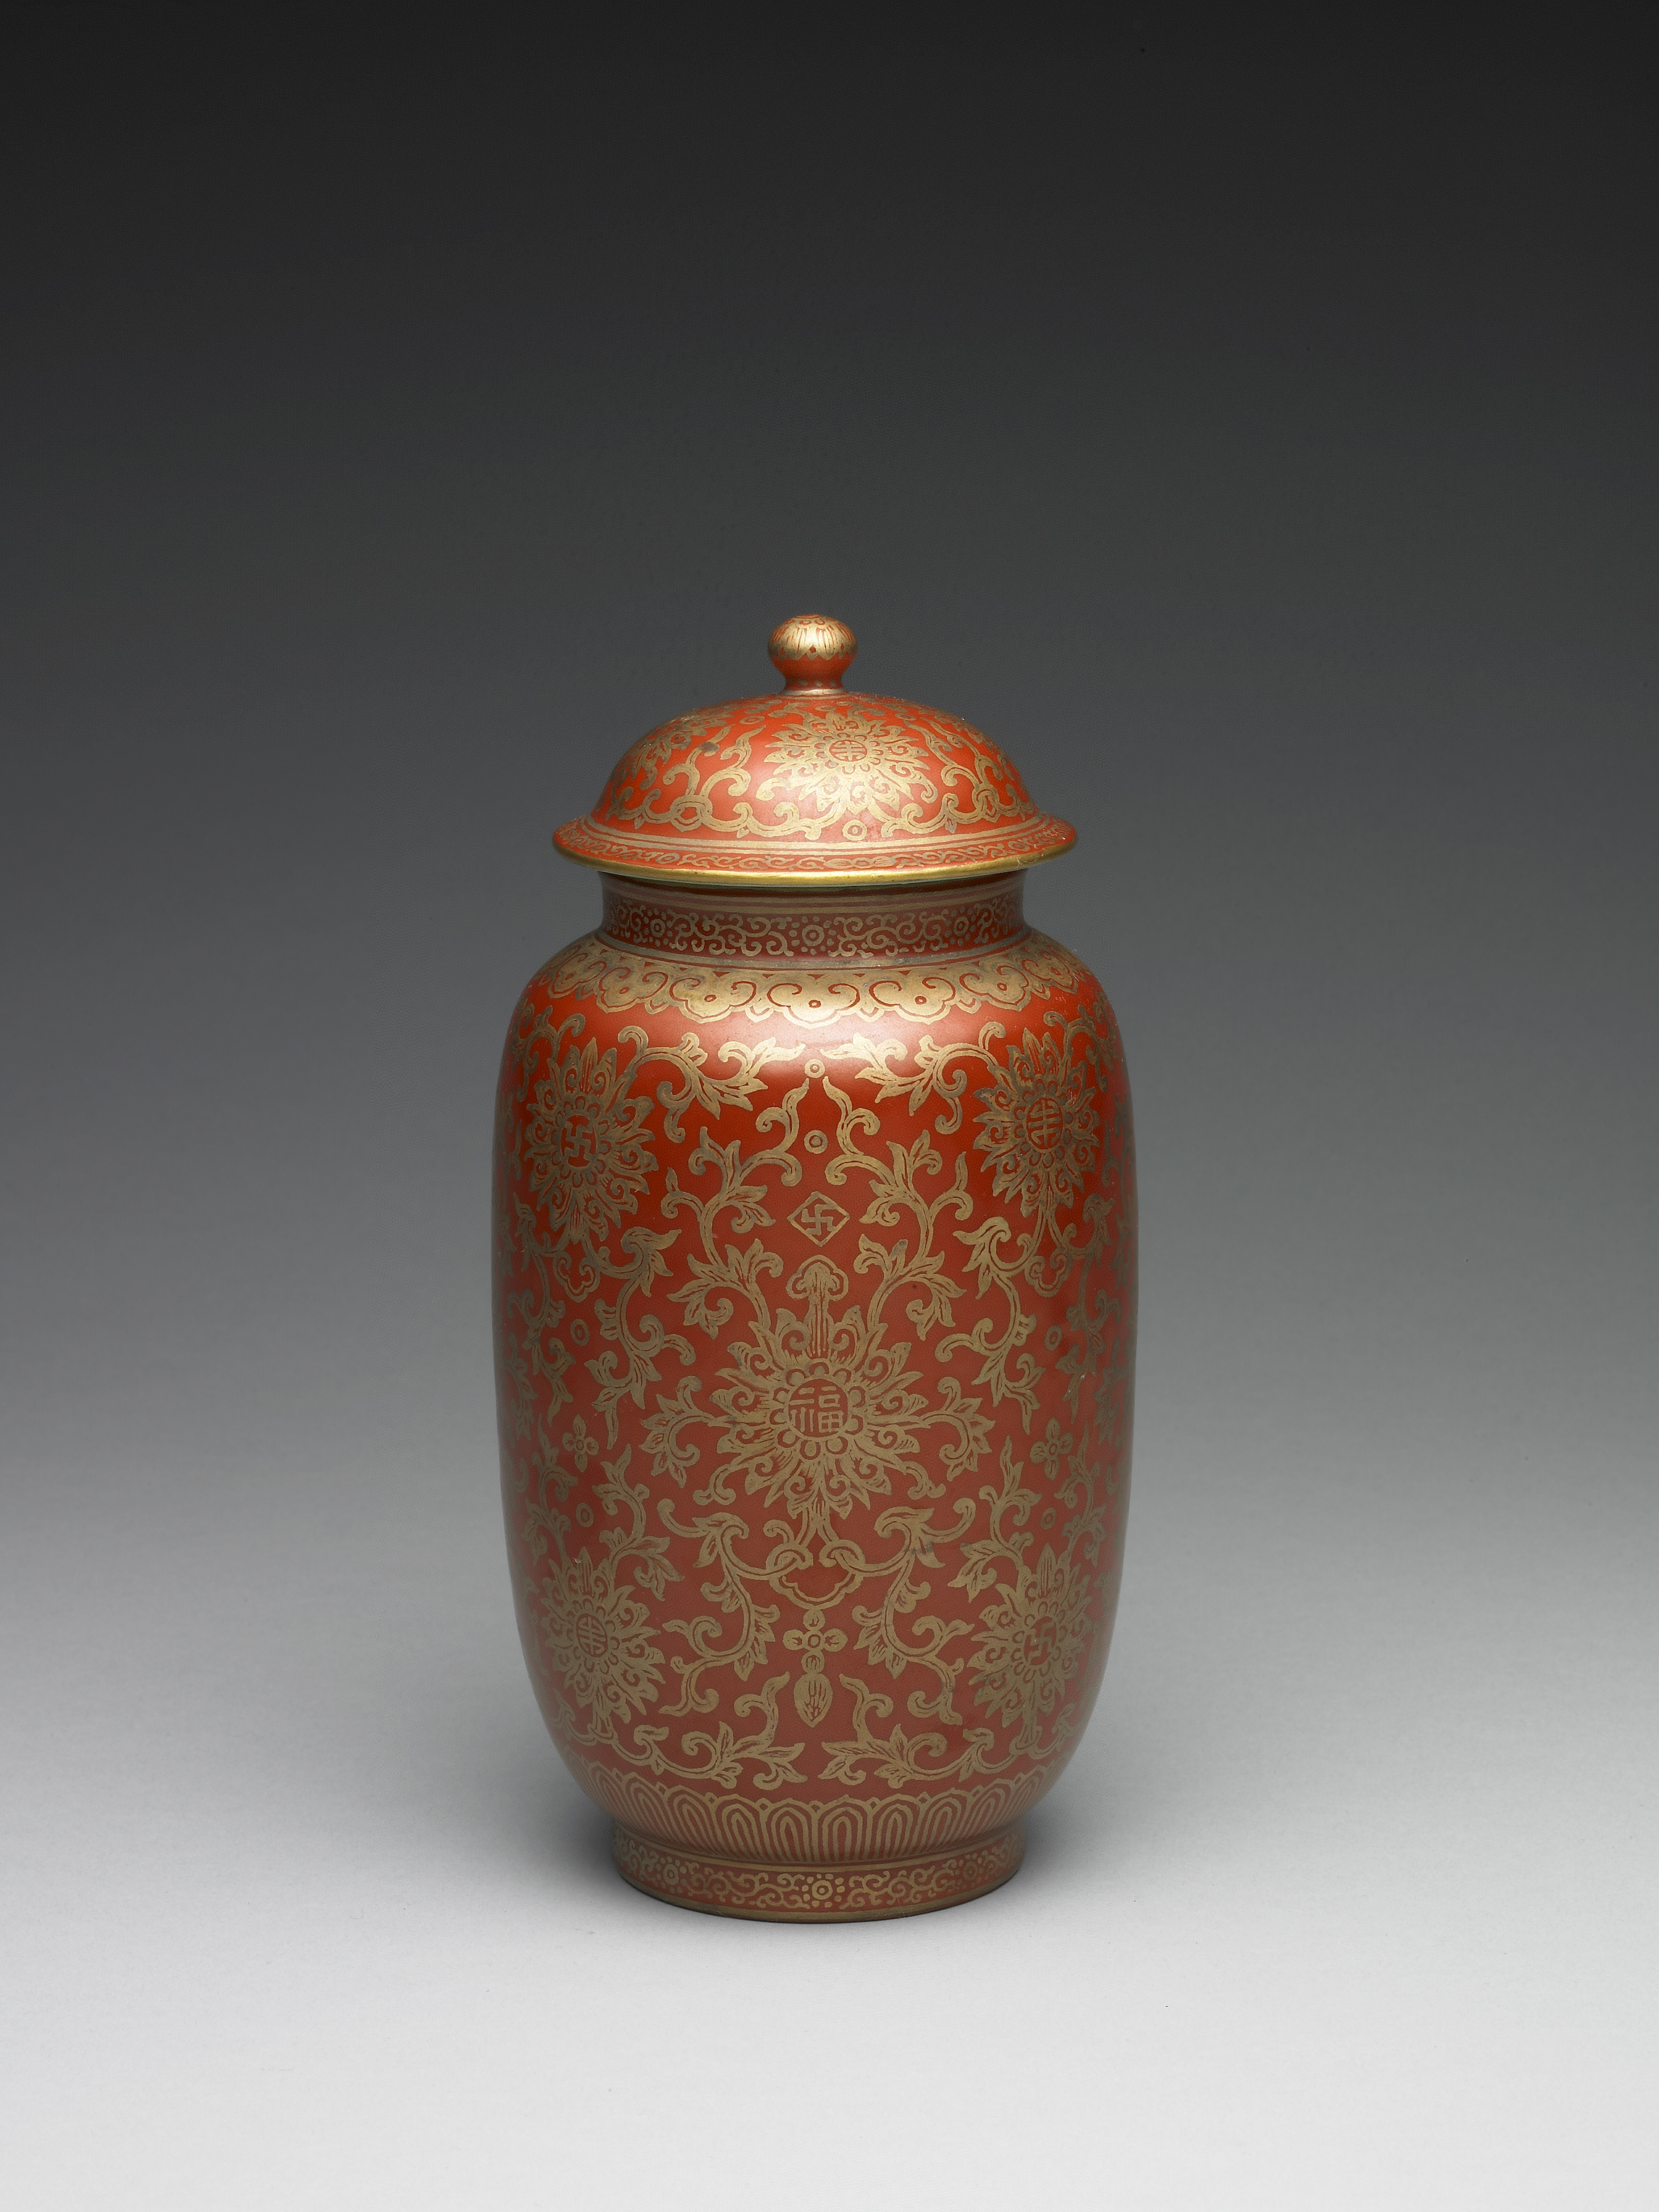 Jar with Myriad Blessings in Gold on a Red Ground